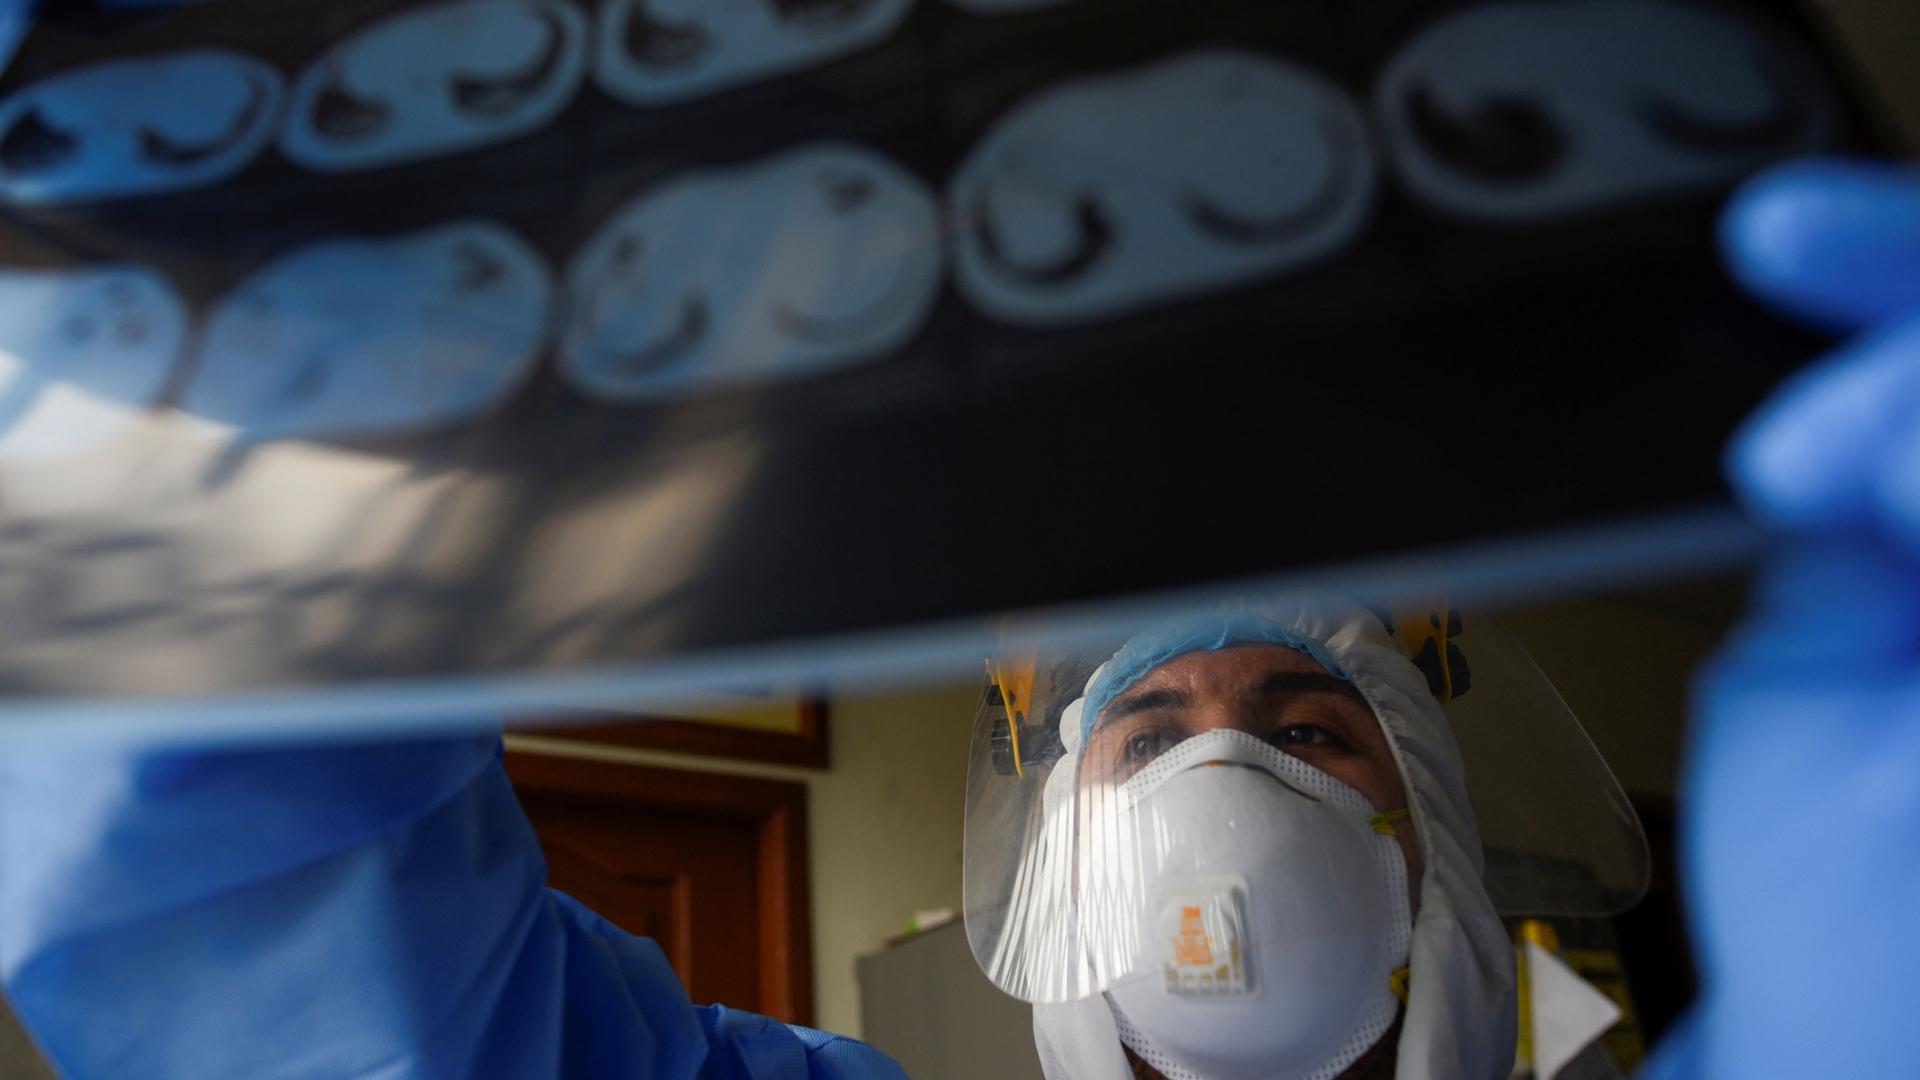 A doctor is shown wearing protective medical clothing and a face shield while holding up a X-ray photo of a patient's lungs.